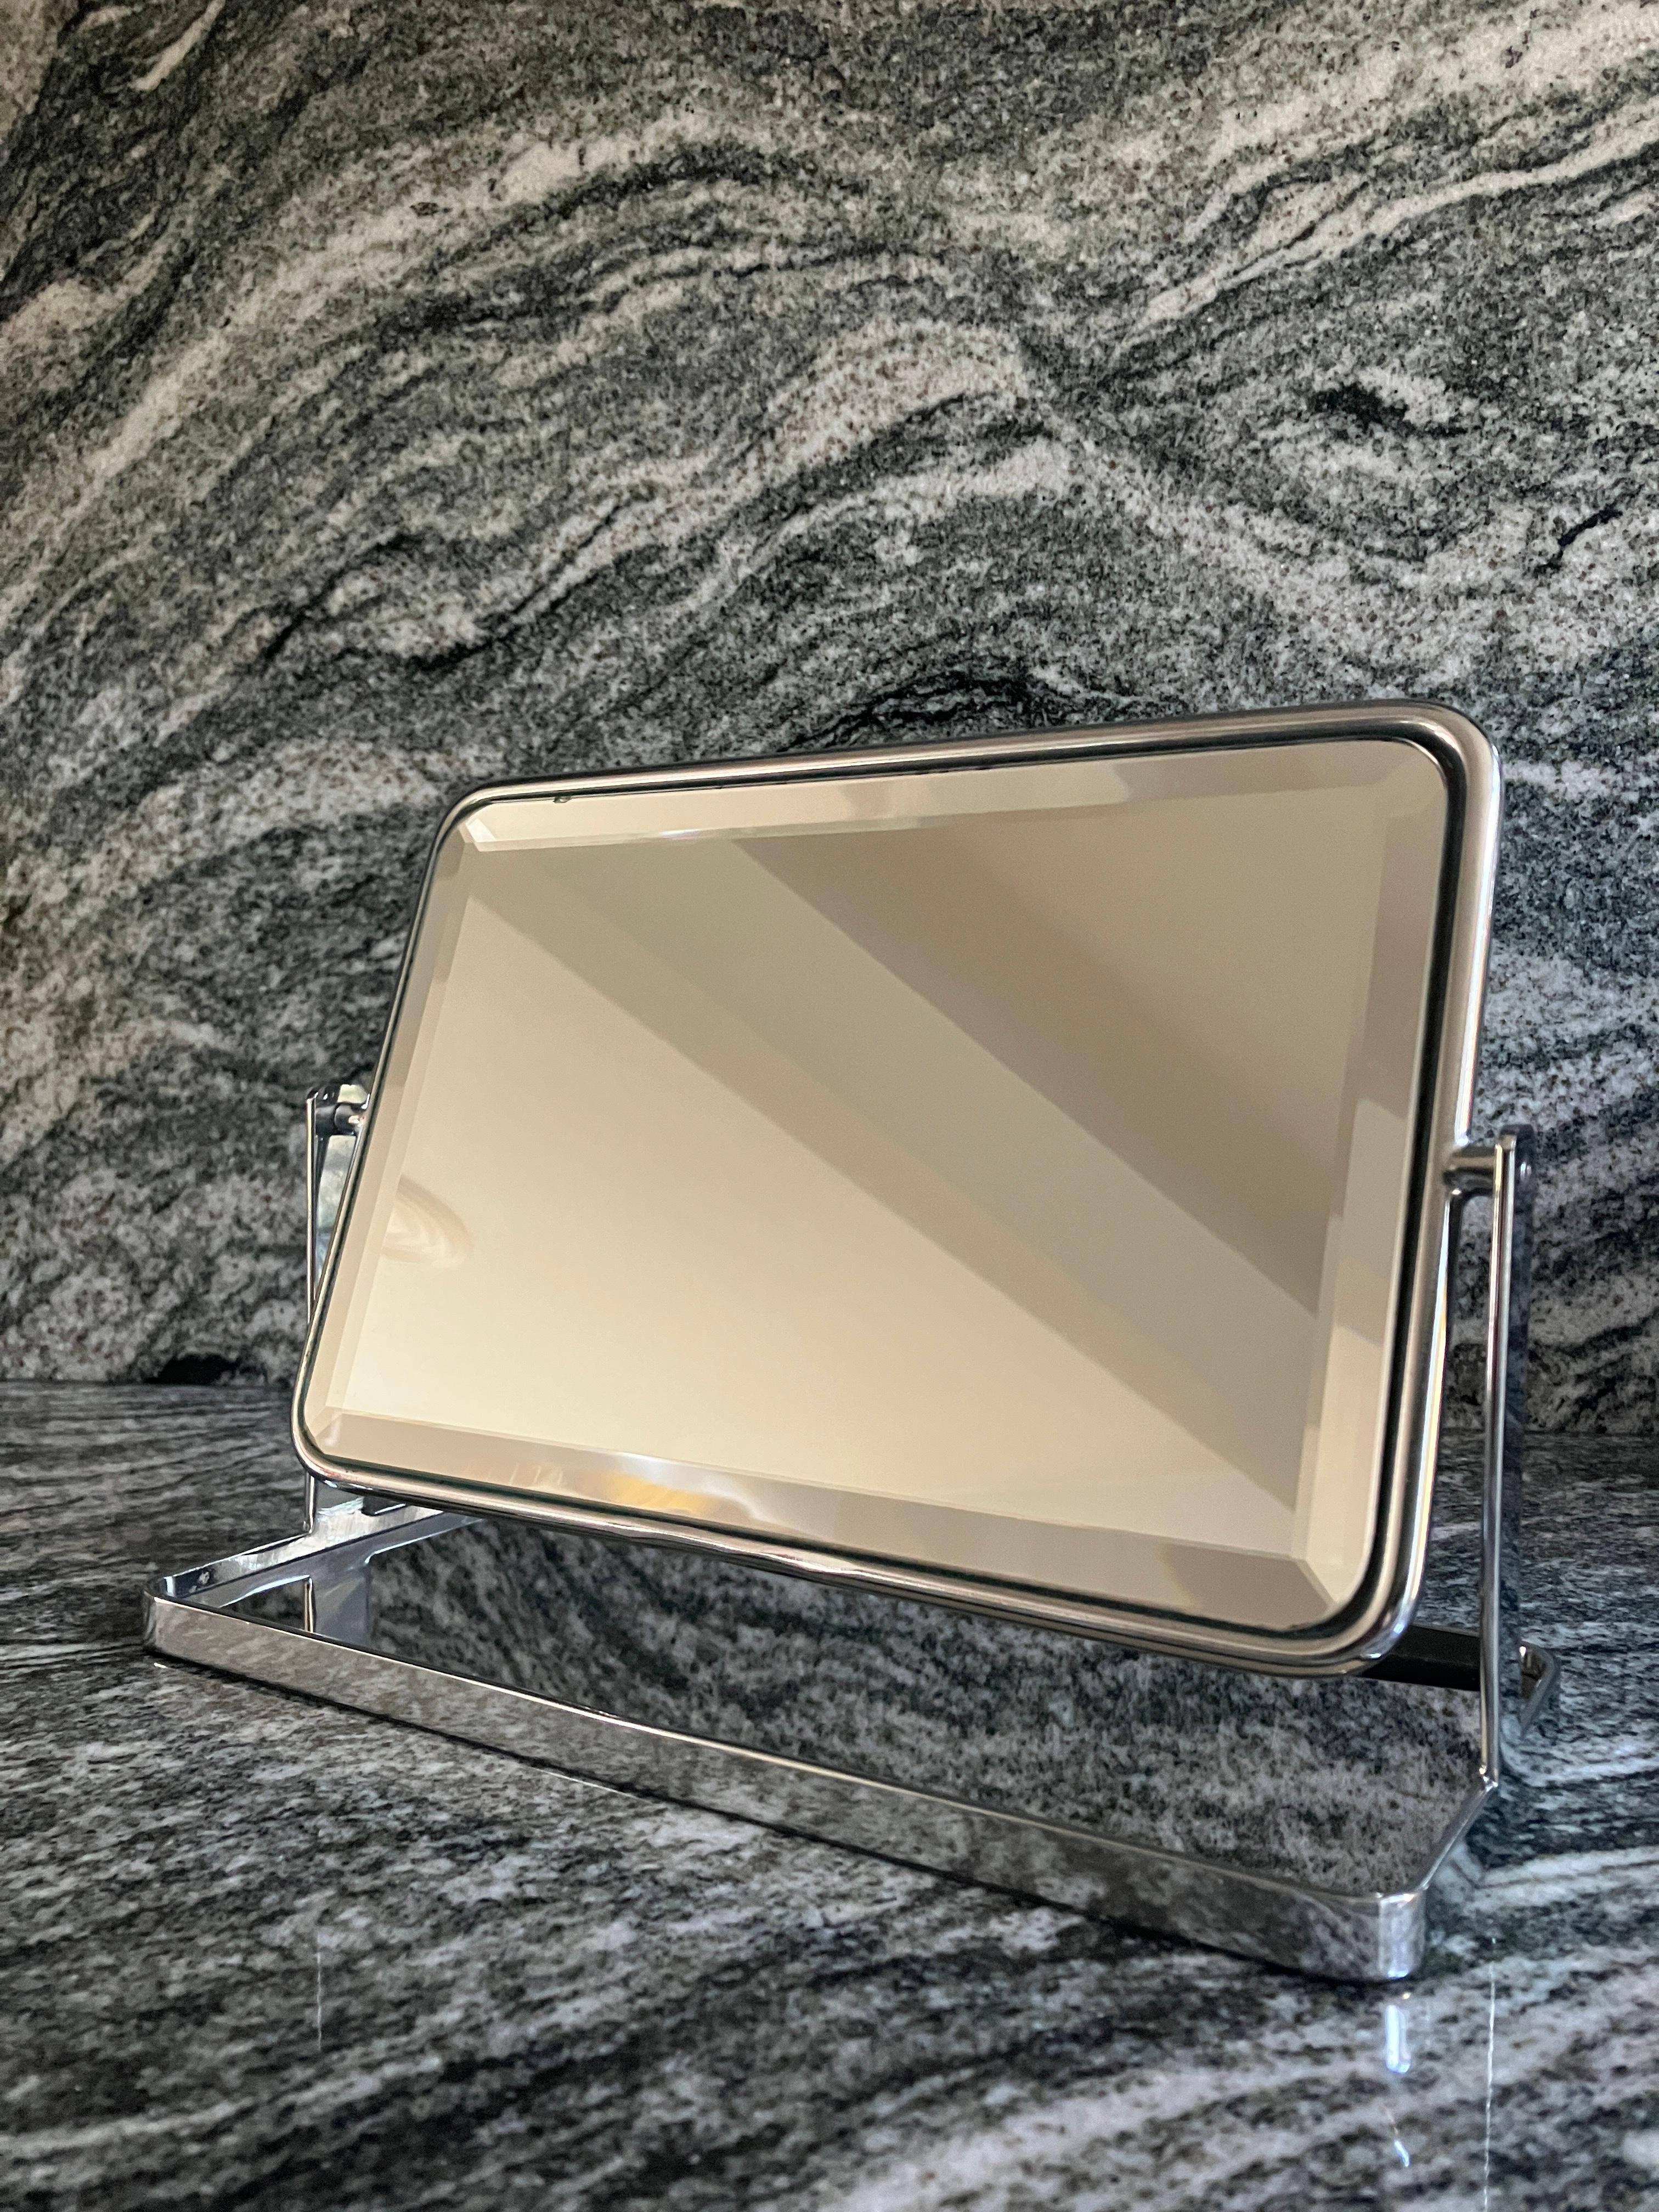 A beautifully made small vintage table mirror with a bevel edge. The mirror sits on top of a mirror-lined tray, ideal for jewellery. This midcentury mirror would look lovely on a dressing table or a desk. Else could be used as a shaving mirror.